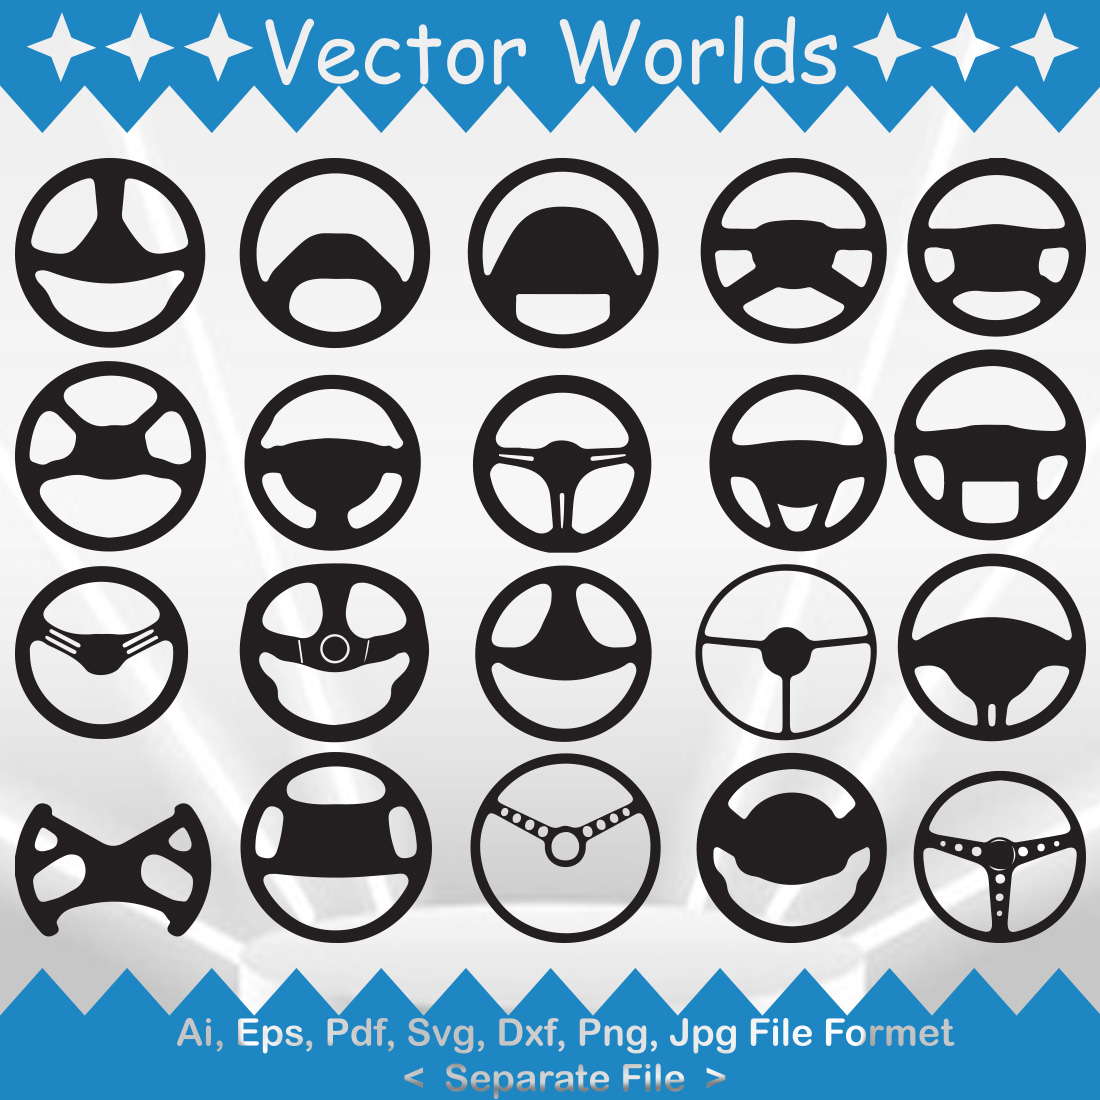 Set of adorable vector image of Car Steering.